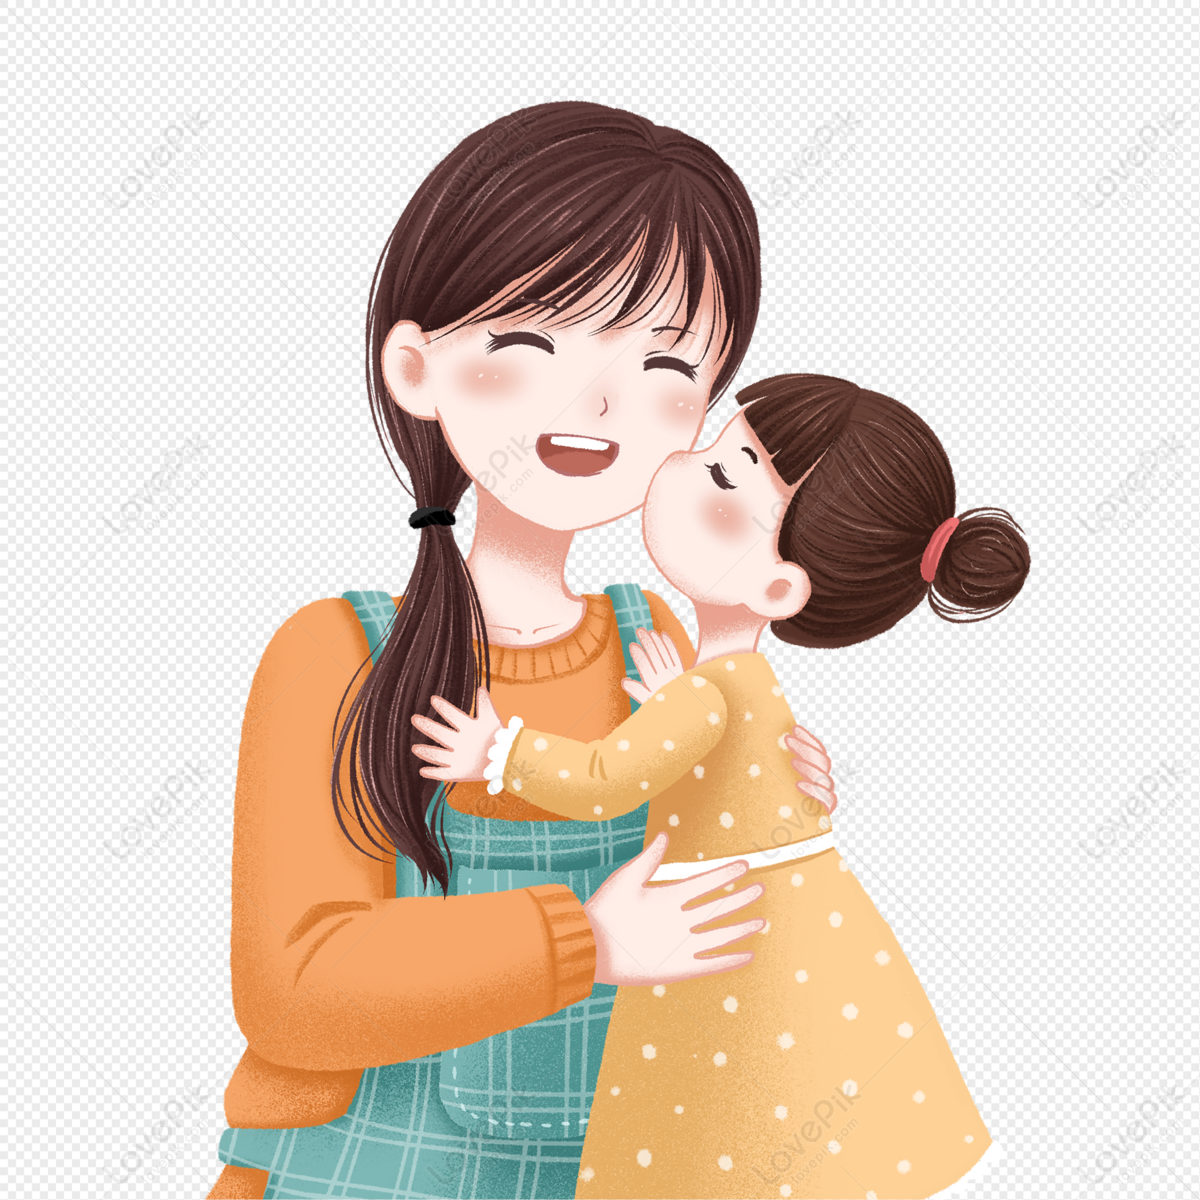 Mothers Day Little Girl Kiss Mother Cartoon Character Elements Png Image  Free Download And Clipart Image For Free Download - Lovepik | 402157261